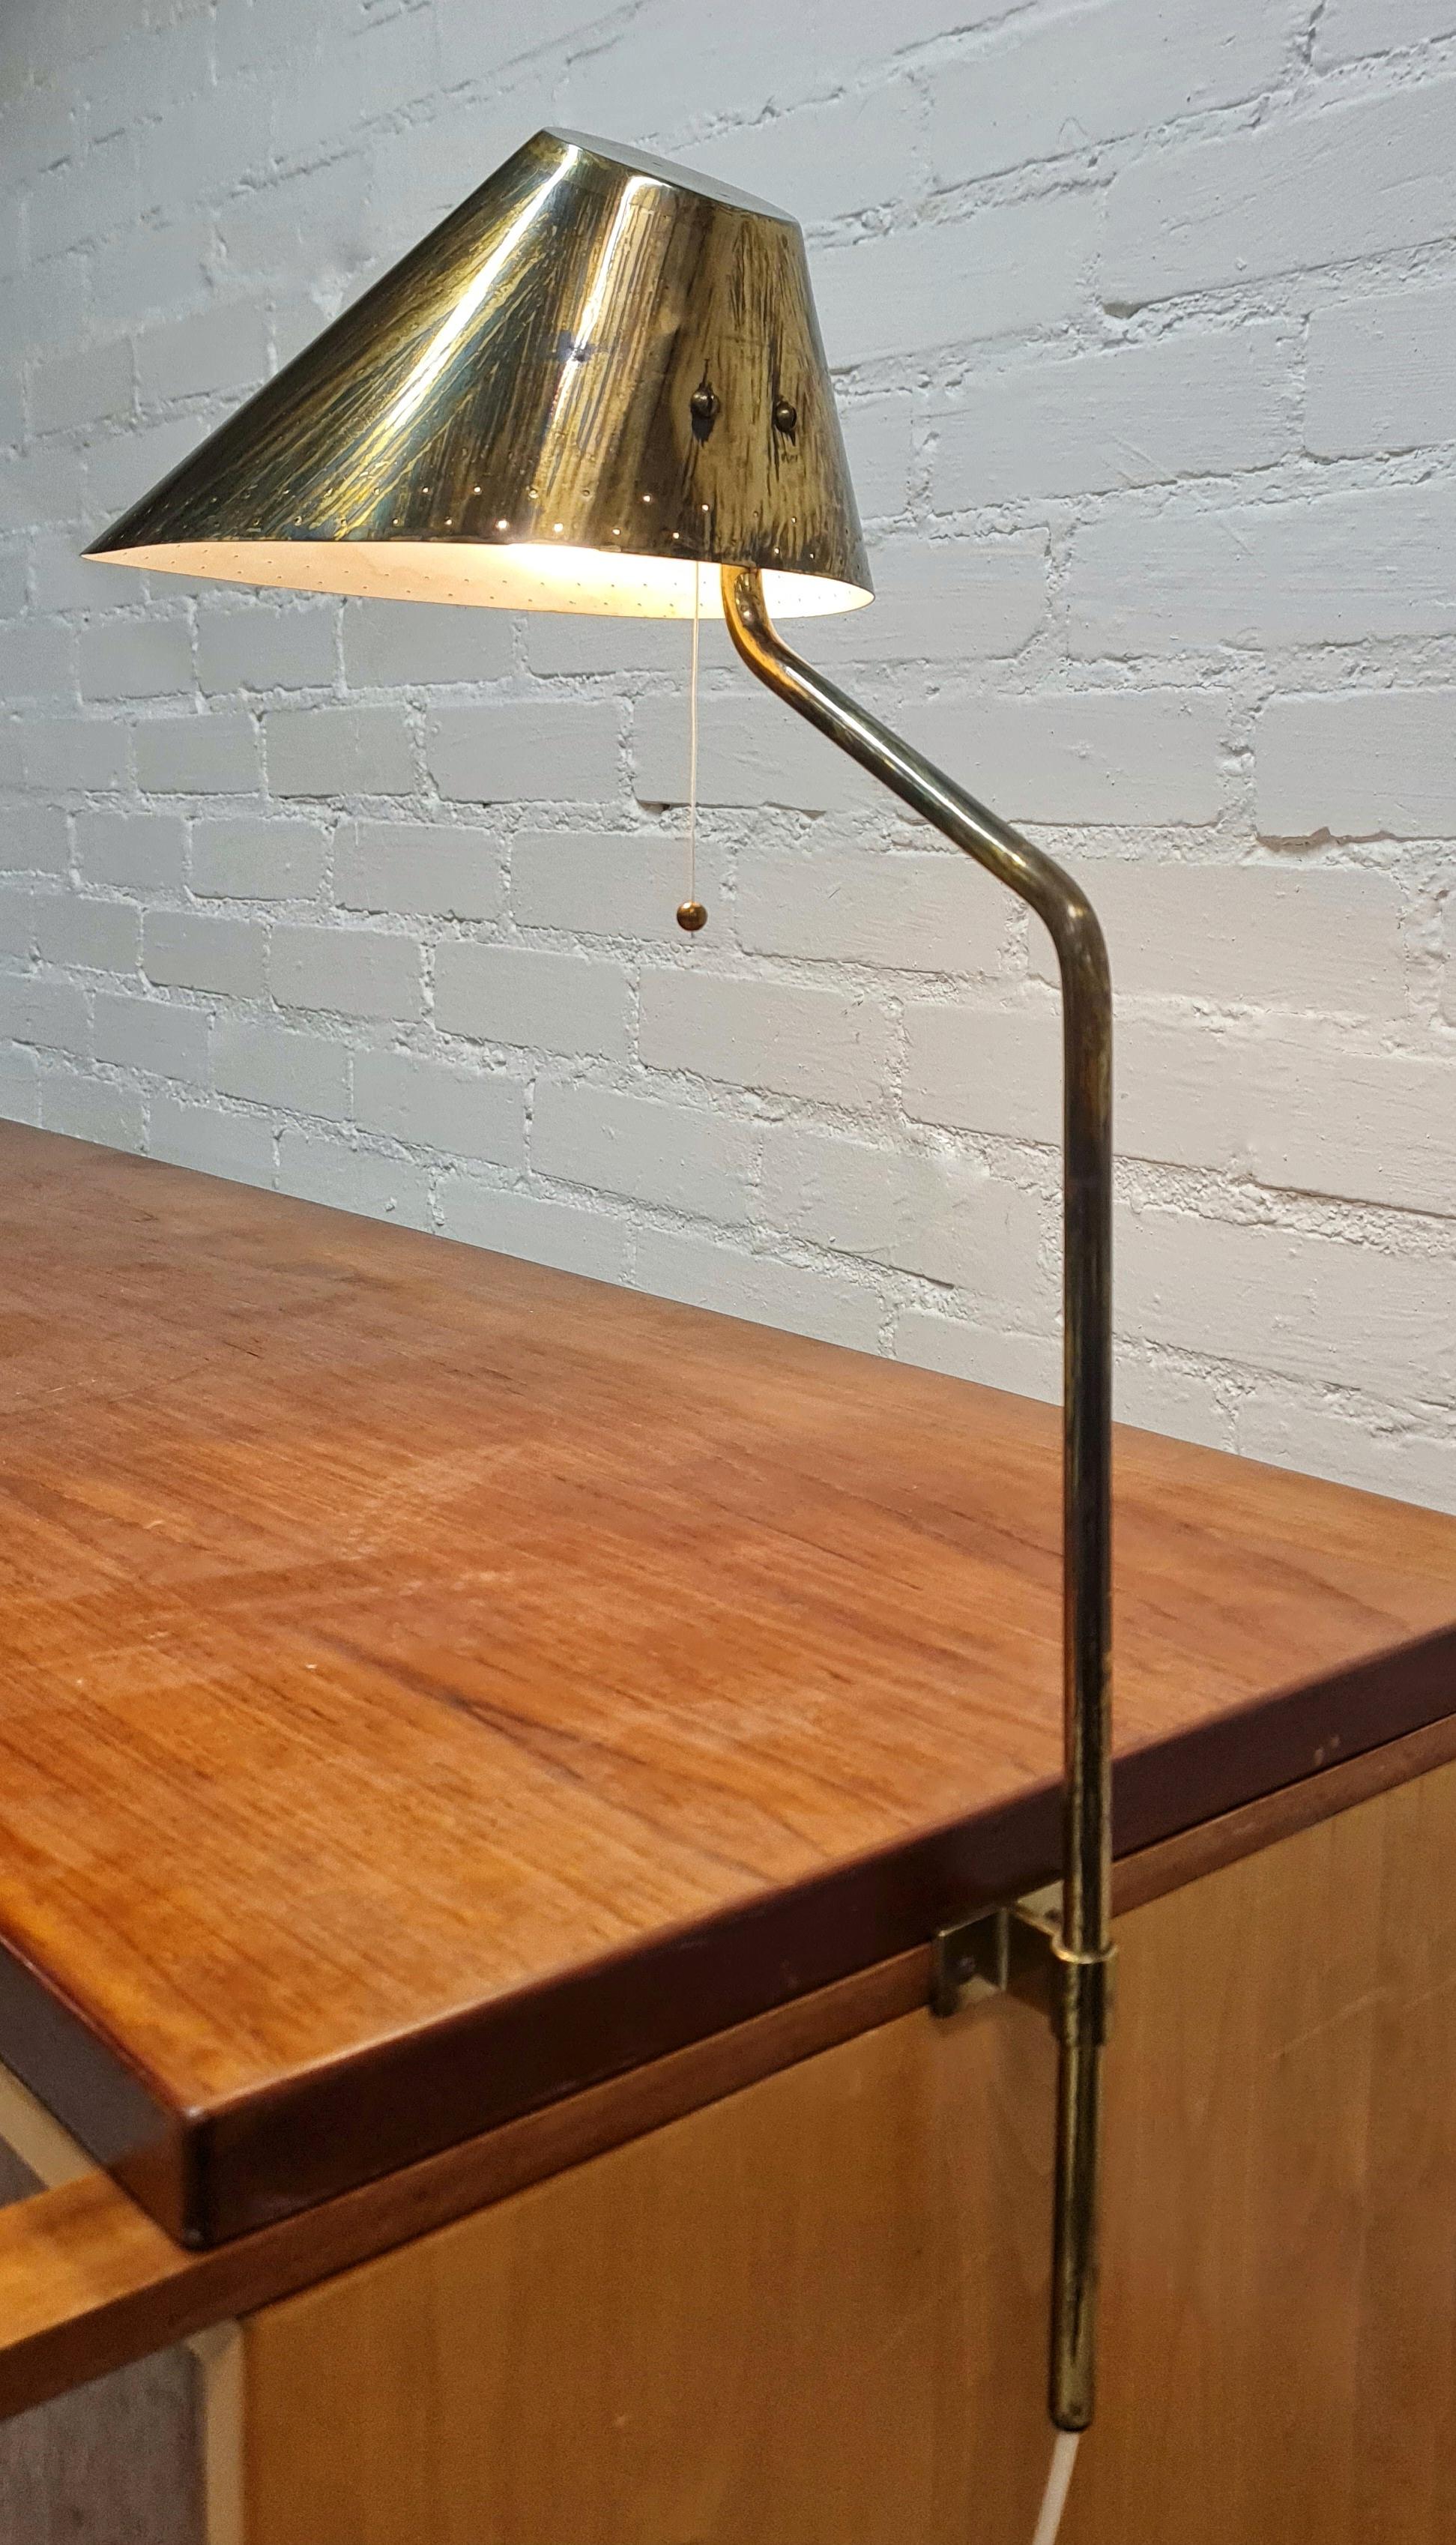 A beautiful and very rare table mounted lamp designed by Paavo Tynell, comissioned by Finnair and manufactured by Taito Oy in 1952. This lamp was comissioned for the Aero (later Finnair) offices in the voimatalo 